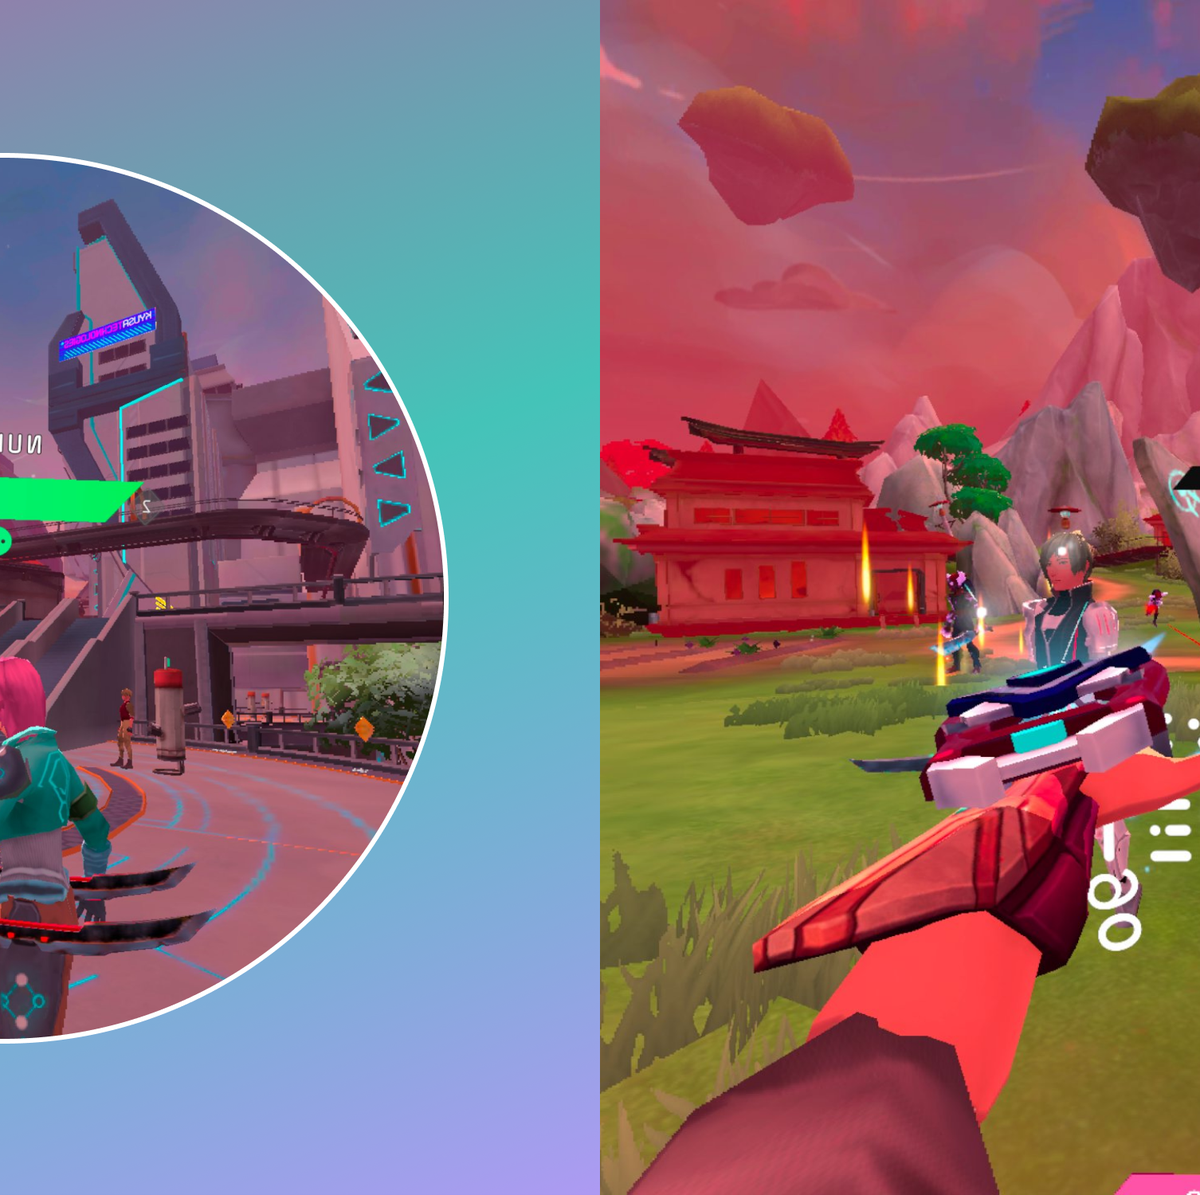 Metaverse Team launches Nerf Strike FPS game for Roblox